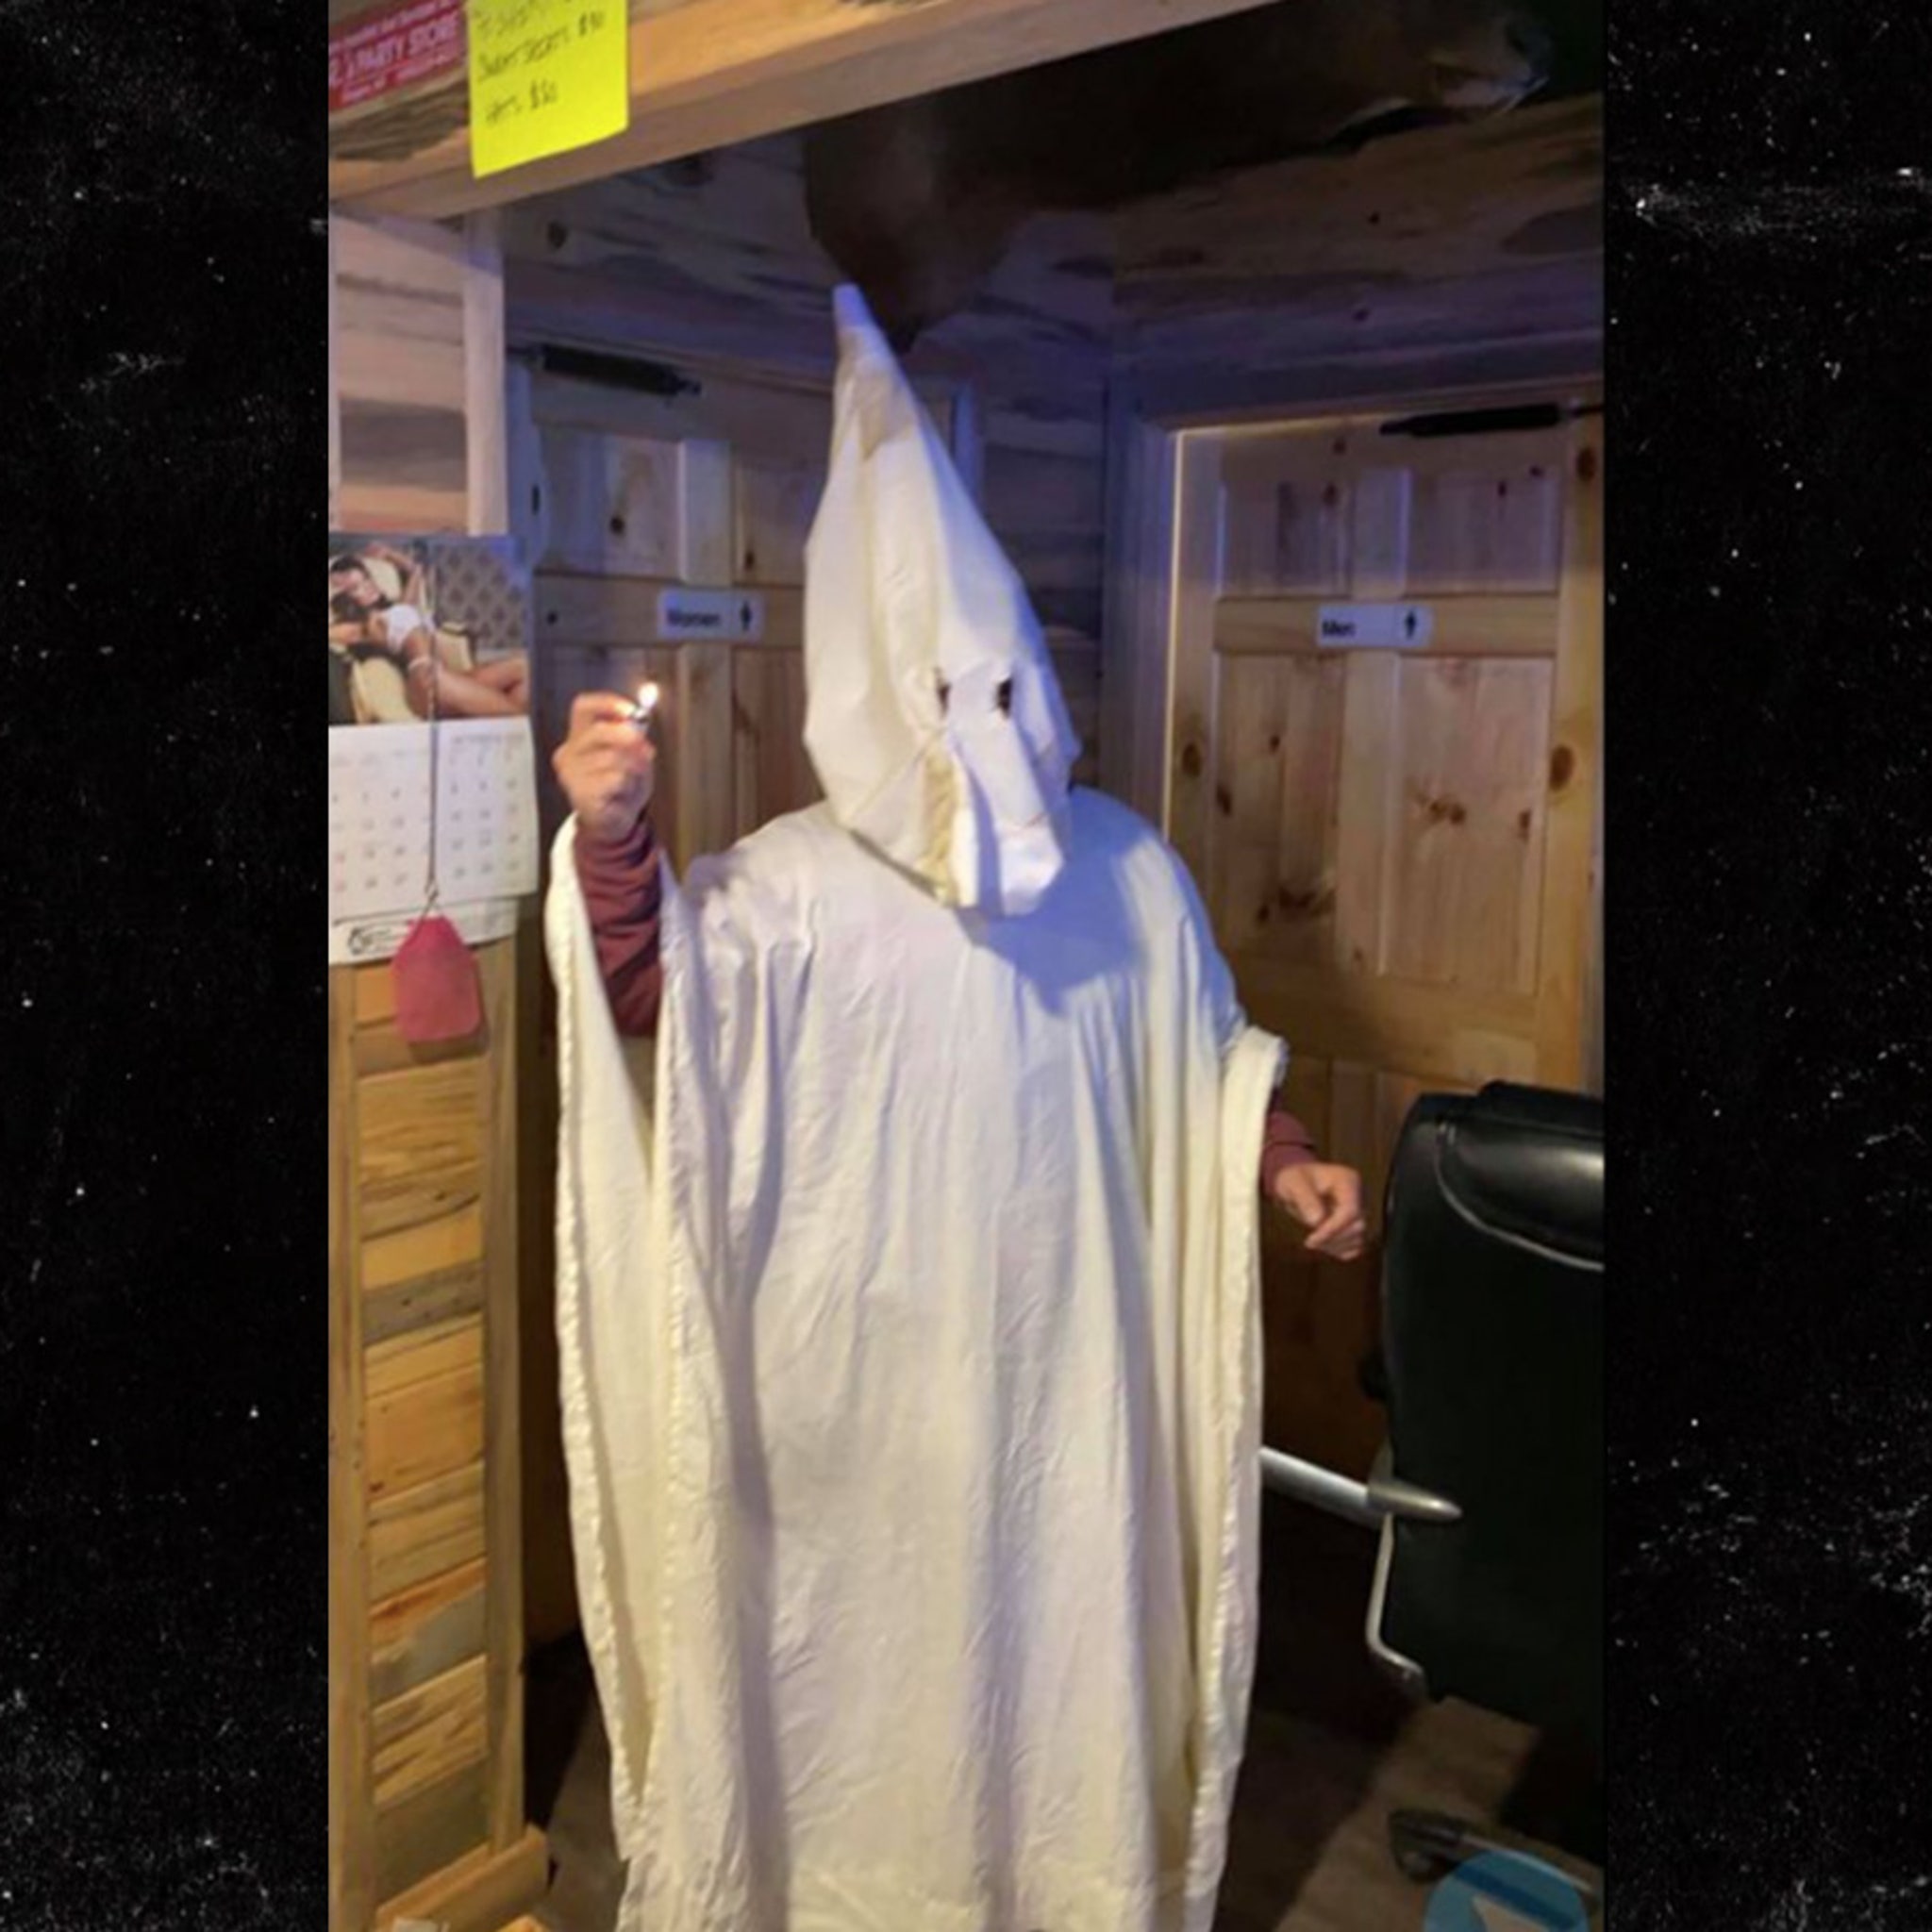 Montana Man in KKK Outfit Wins Costume Contest, He and Bar Apologize